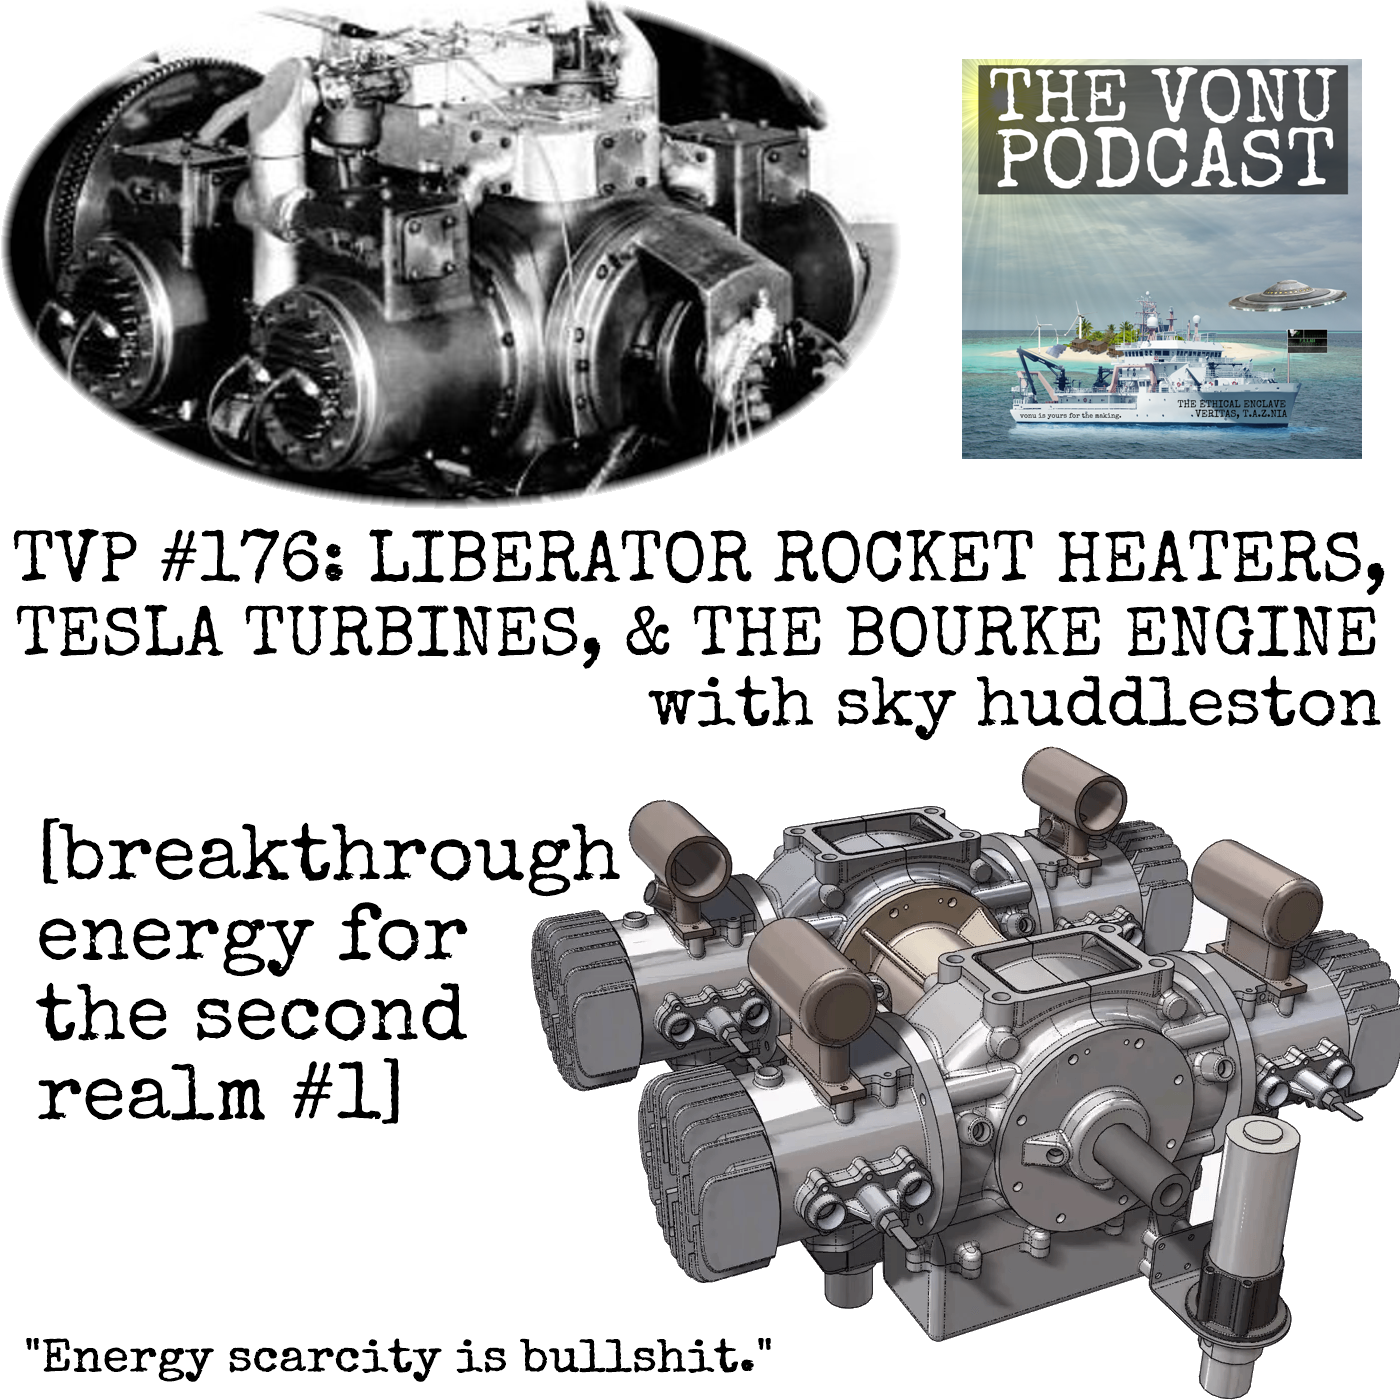 TVP #176: Liberator Rocket Heaters, Tesla Turbines, & The Bourke Engine with Sky Huddleston [Breakthrough Energy For The Second Realm #1]